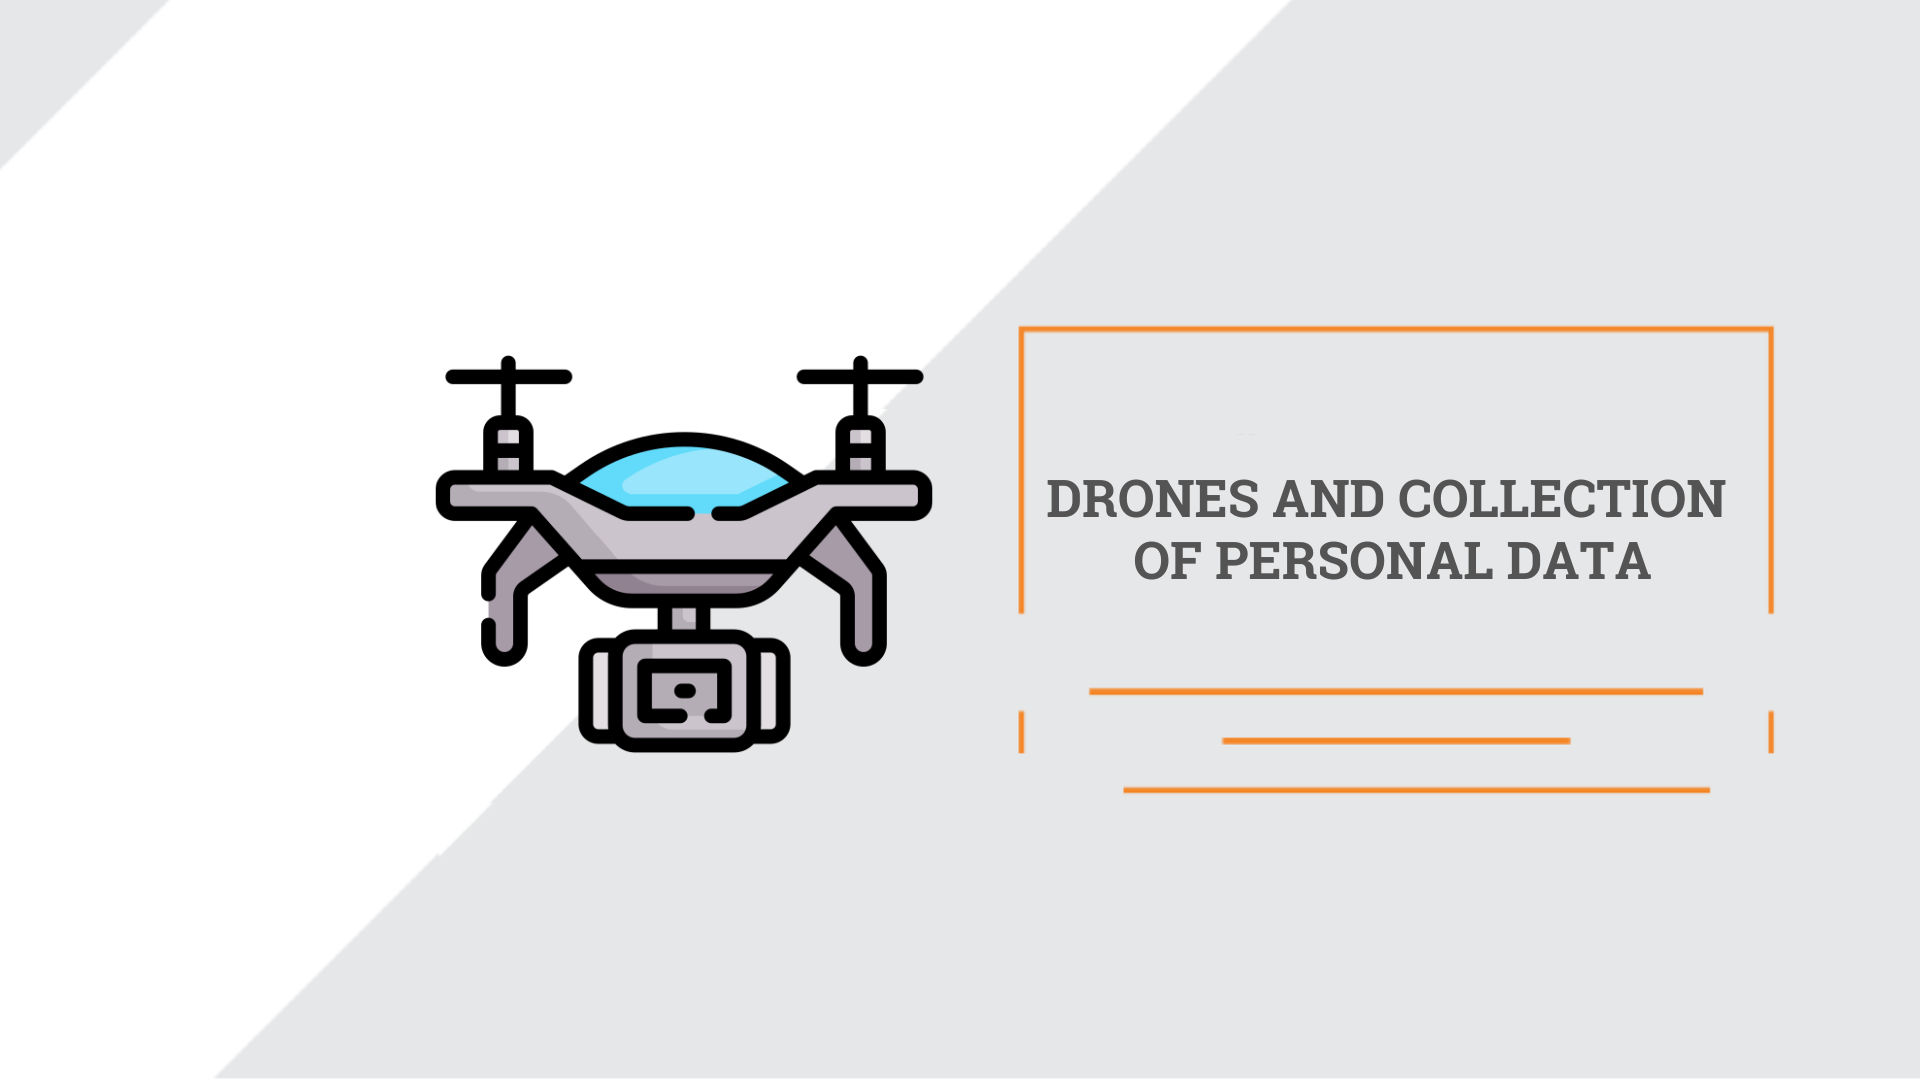 Drones and collection of personal data. GDPR: privacy risks.